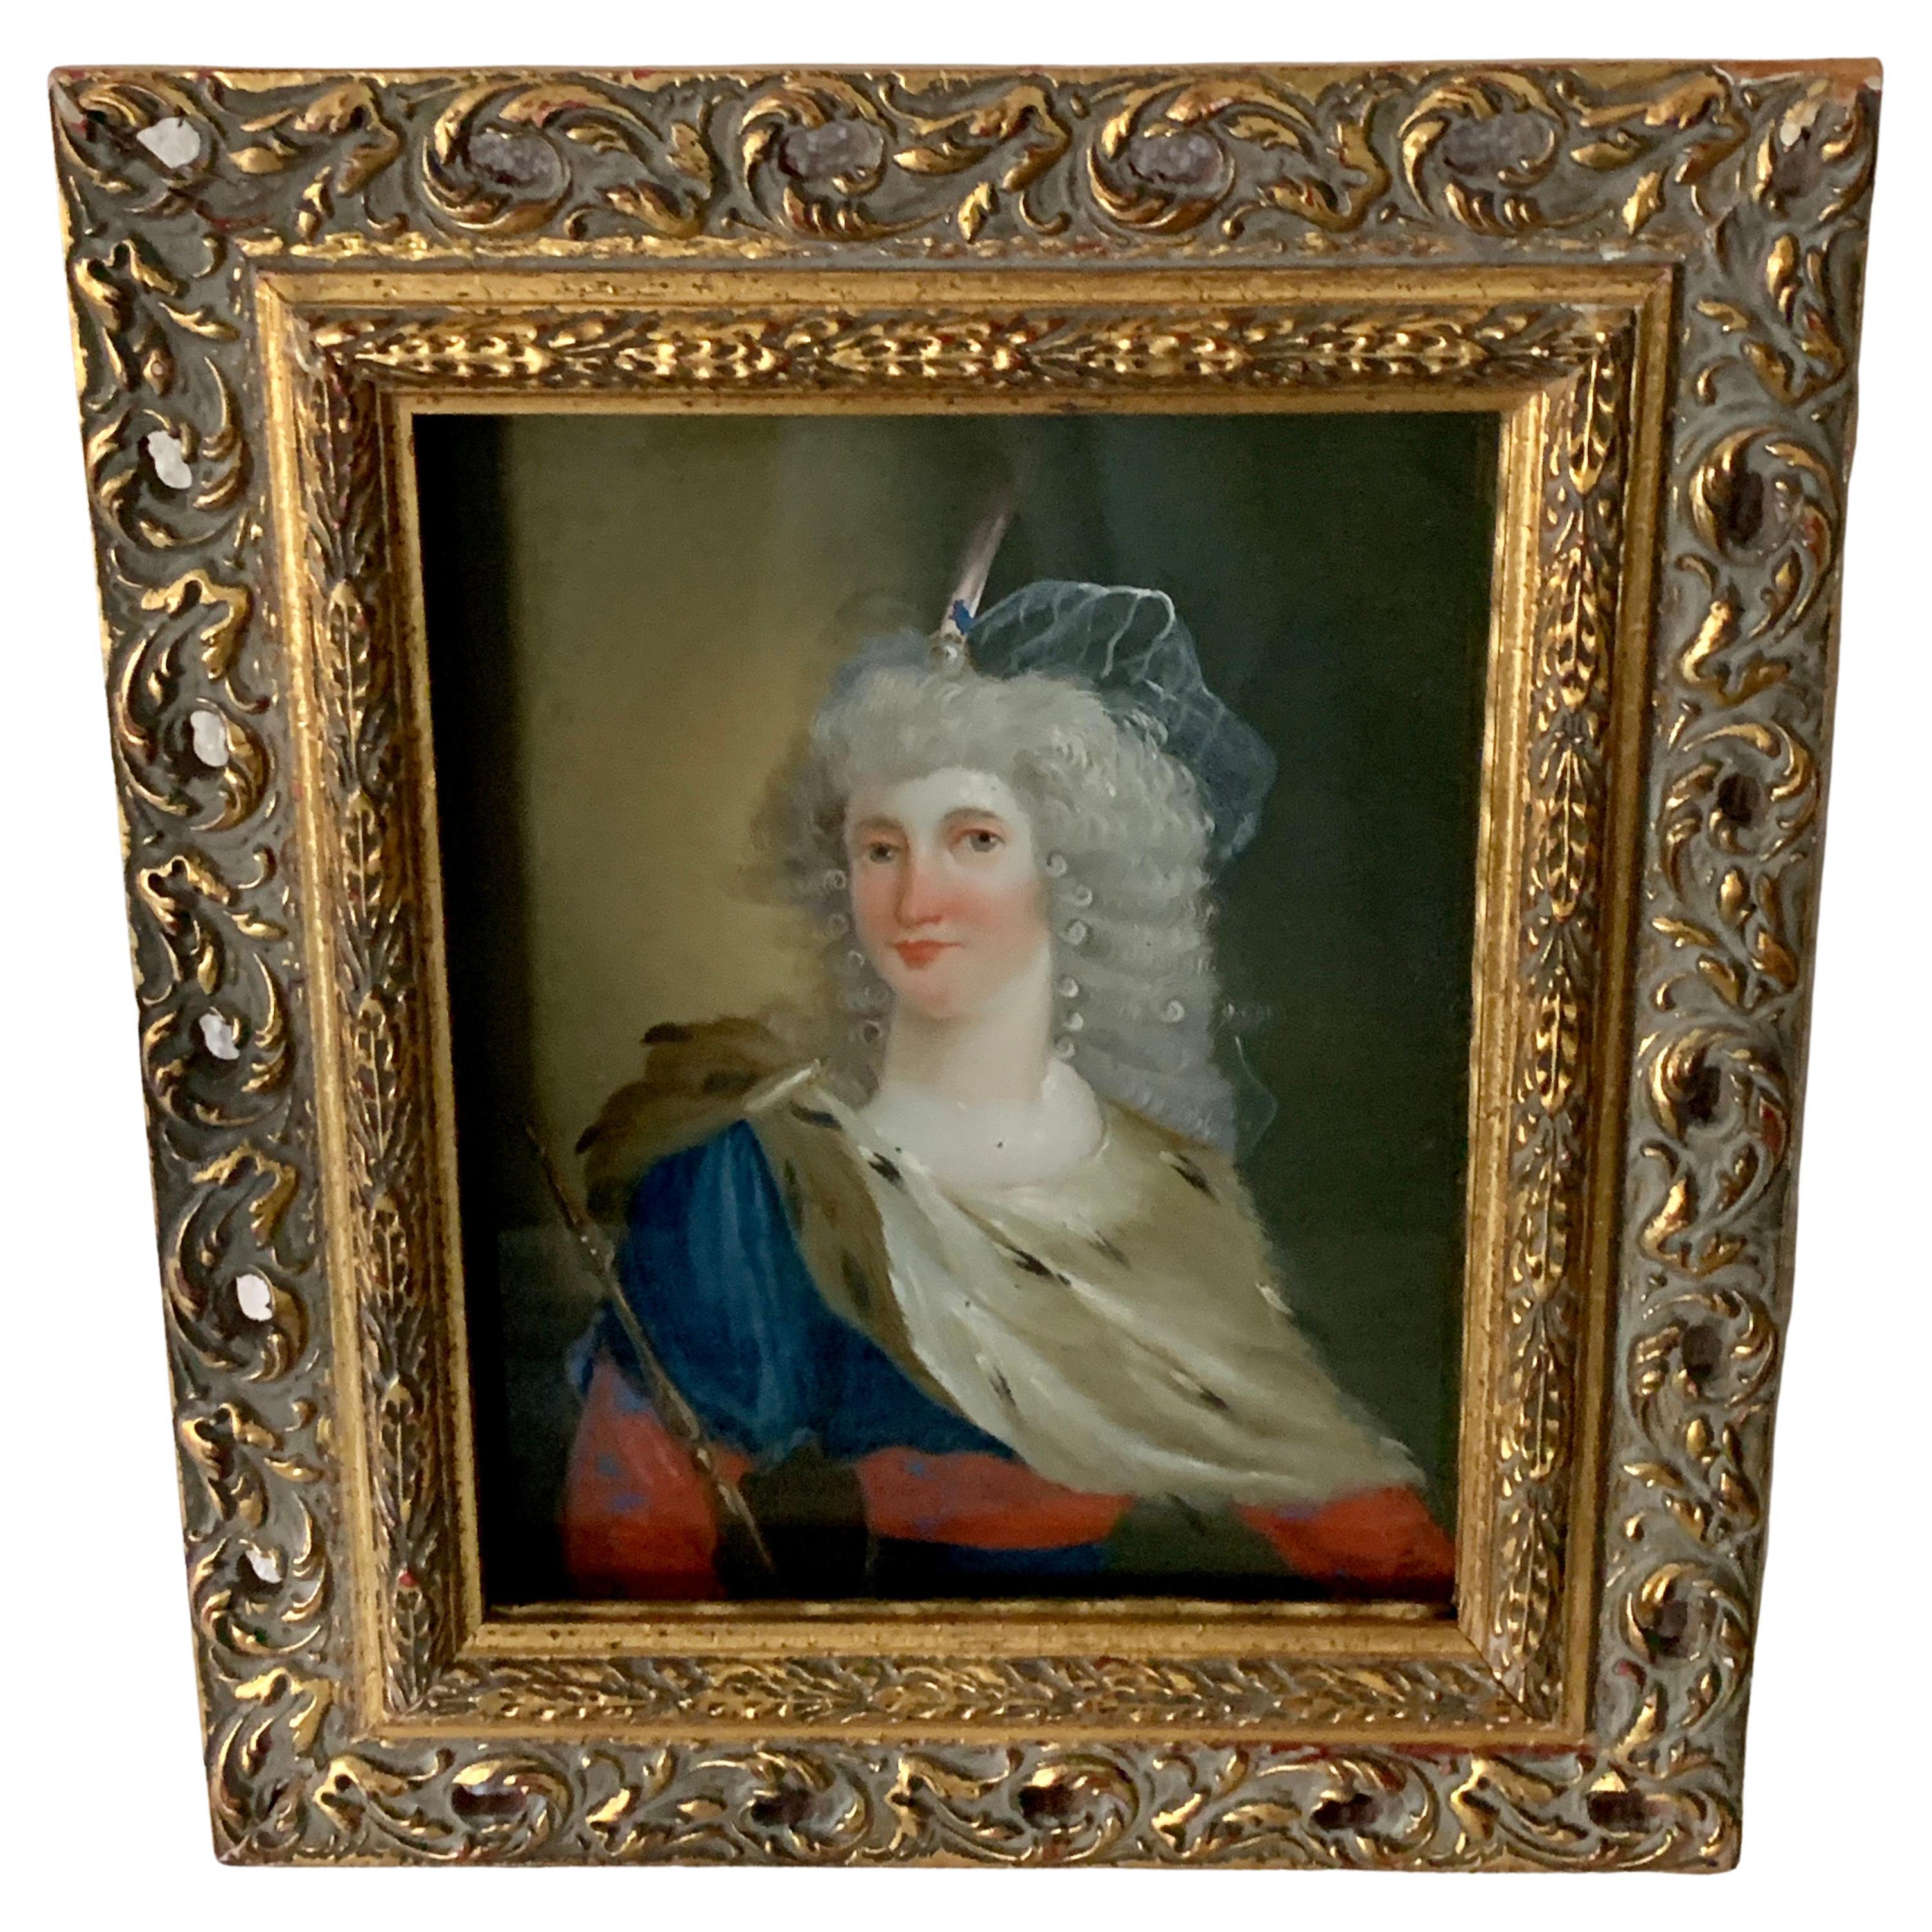 18th Century Reverse Painted Image on Glass in a Gilt Frame